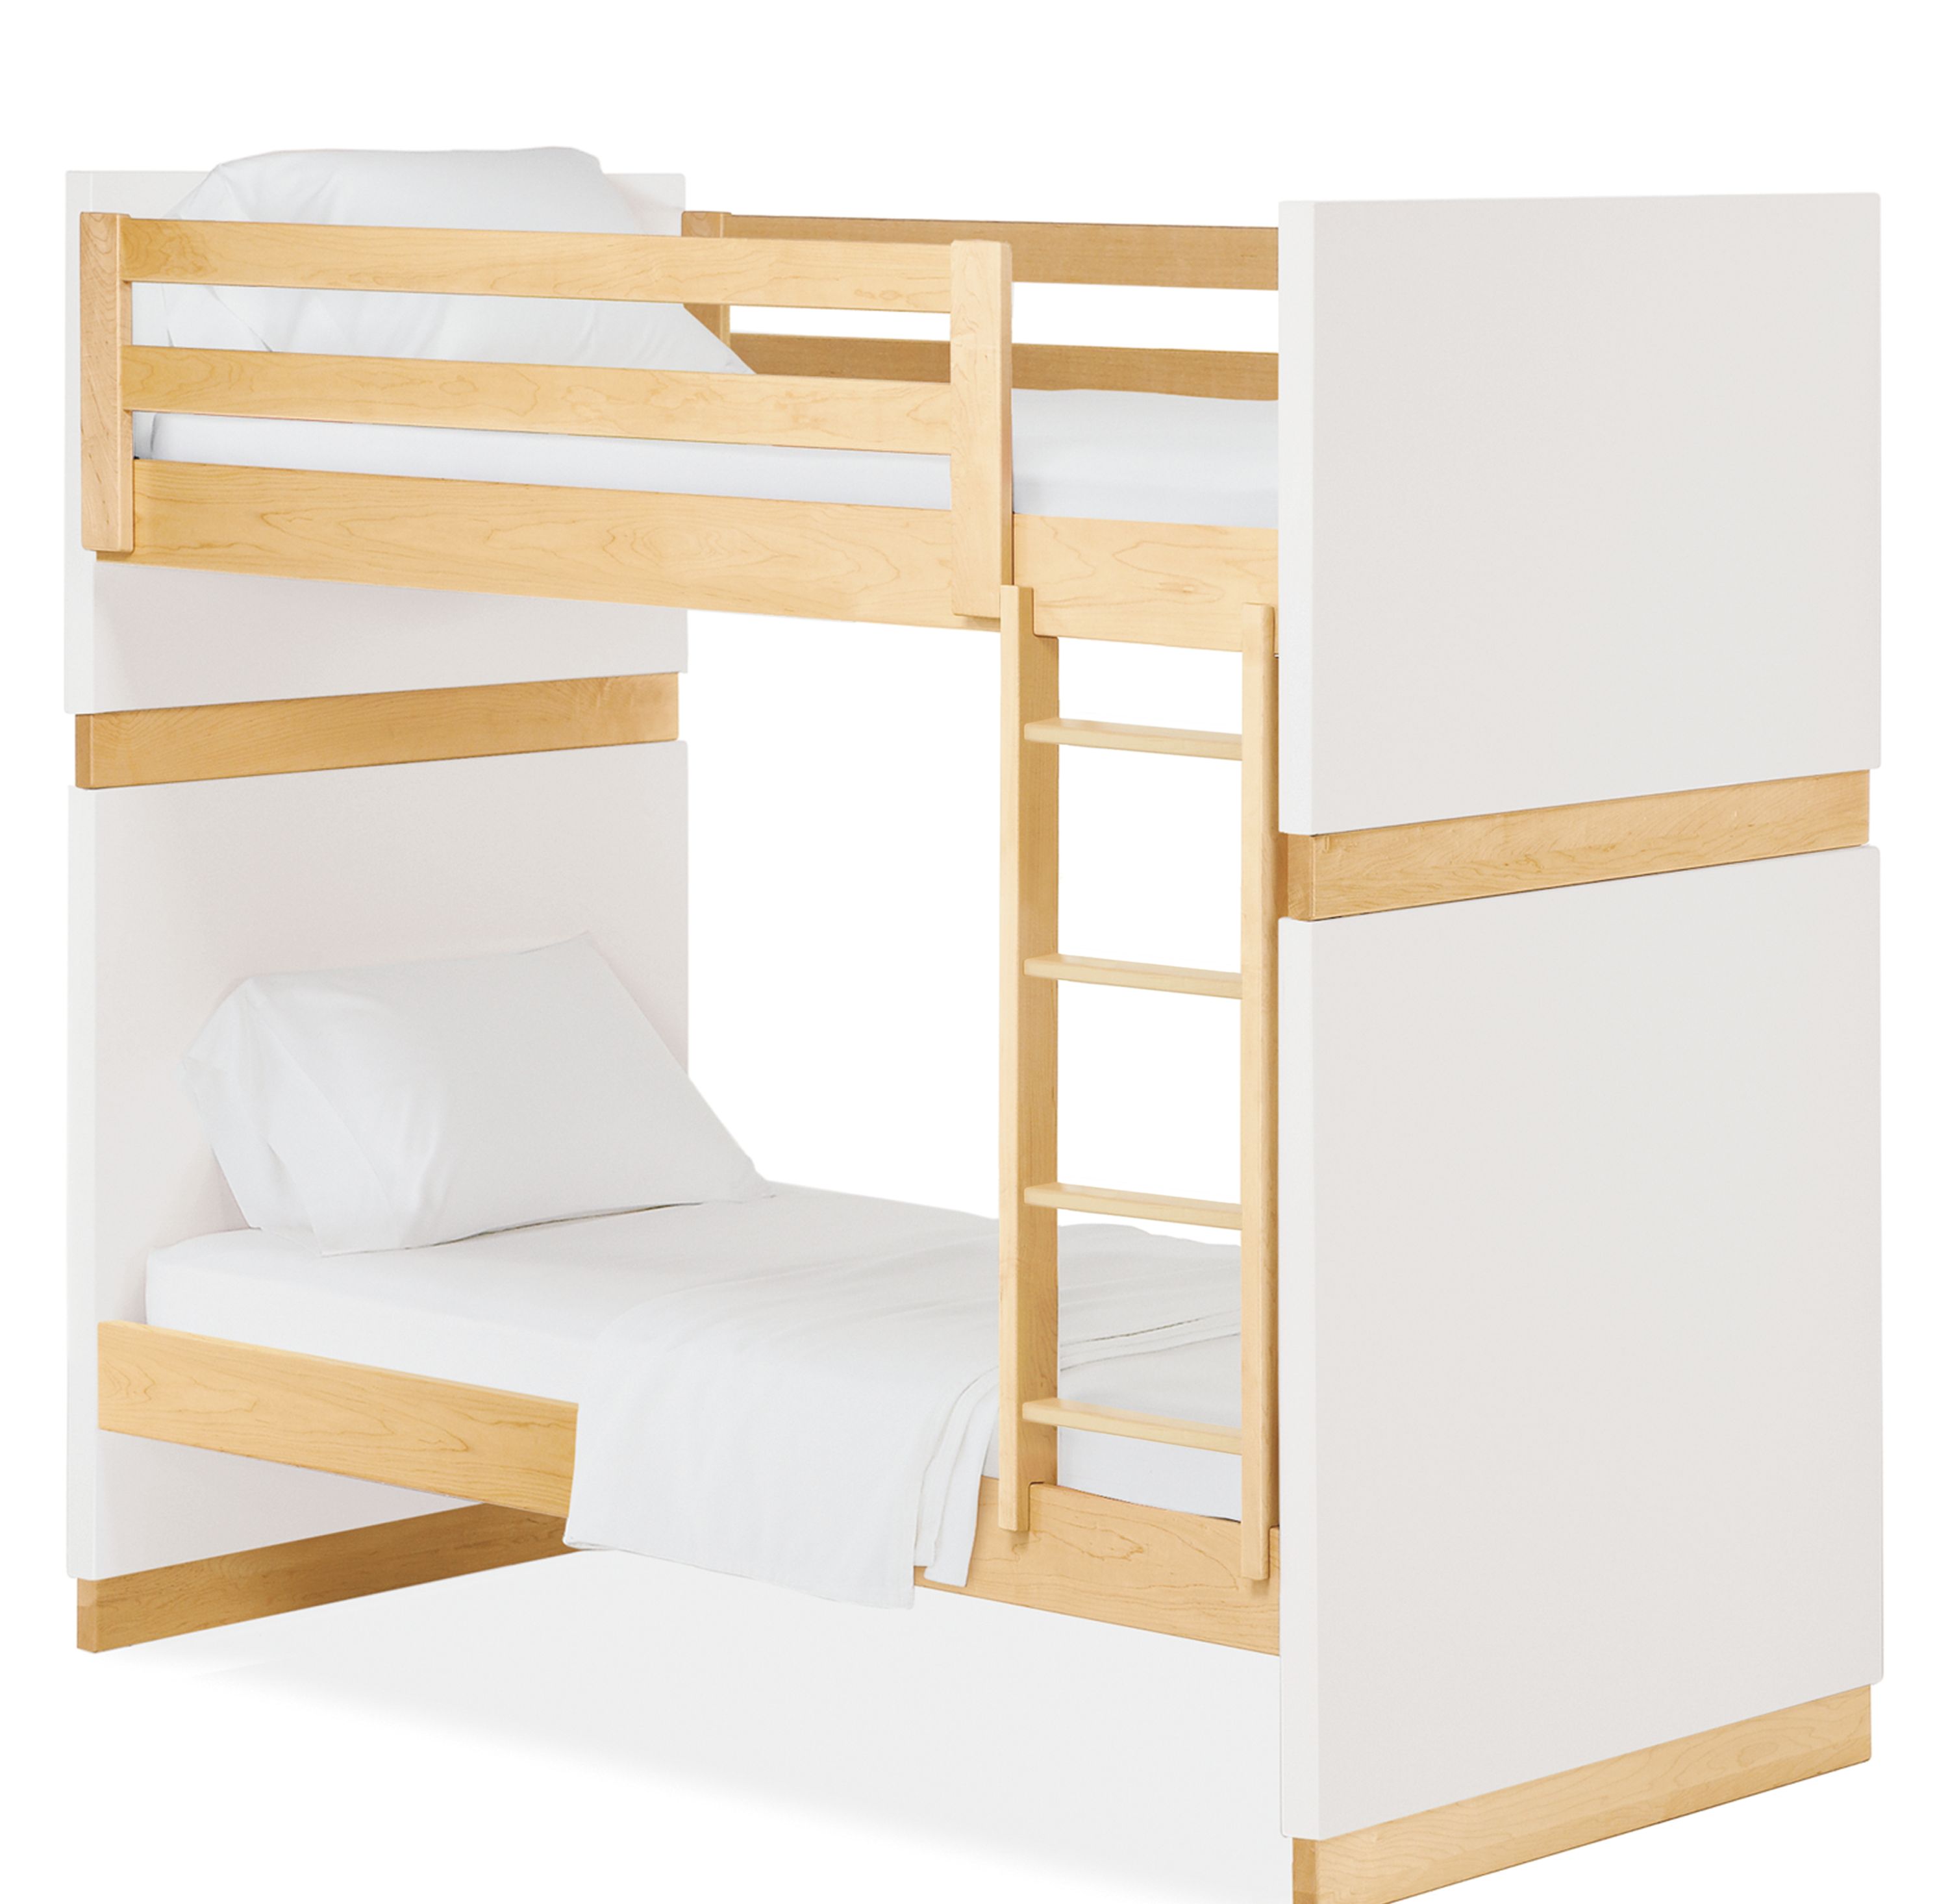 Moda Bunk Beds Twin Over, Mid Century Modern Bunk Bed